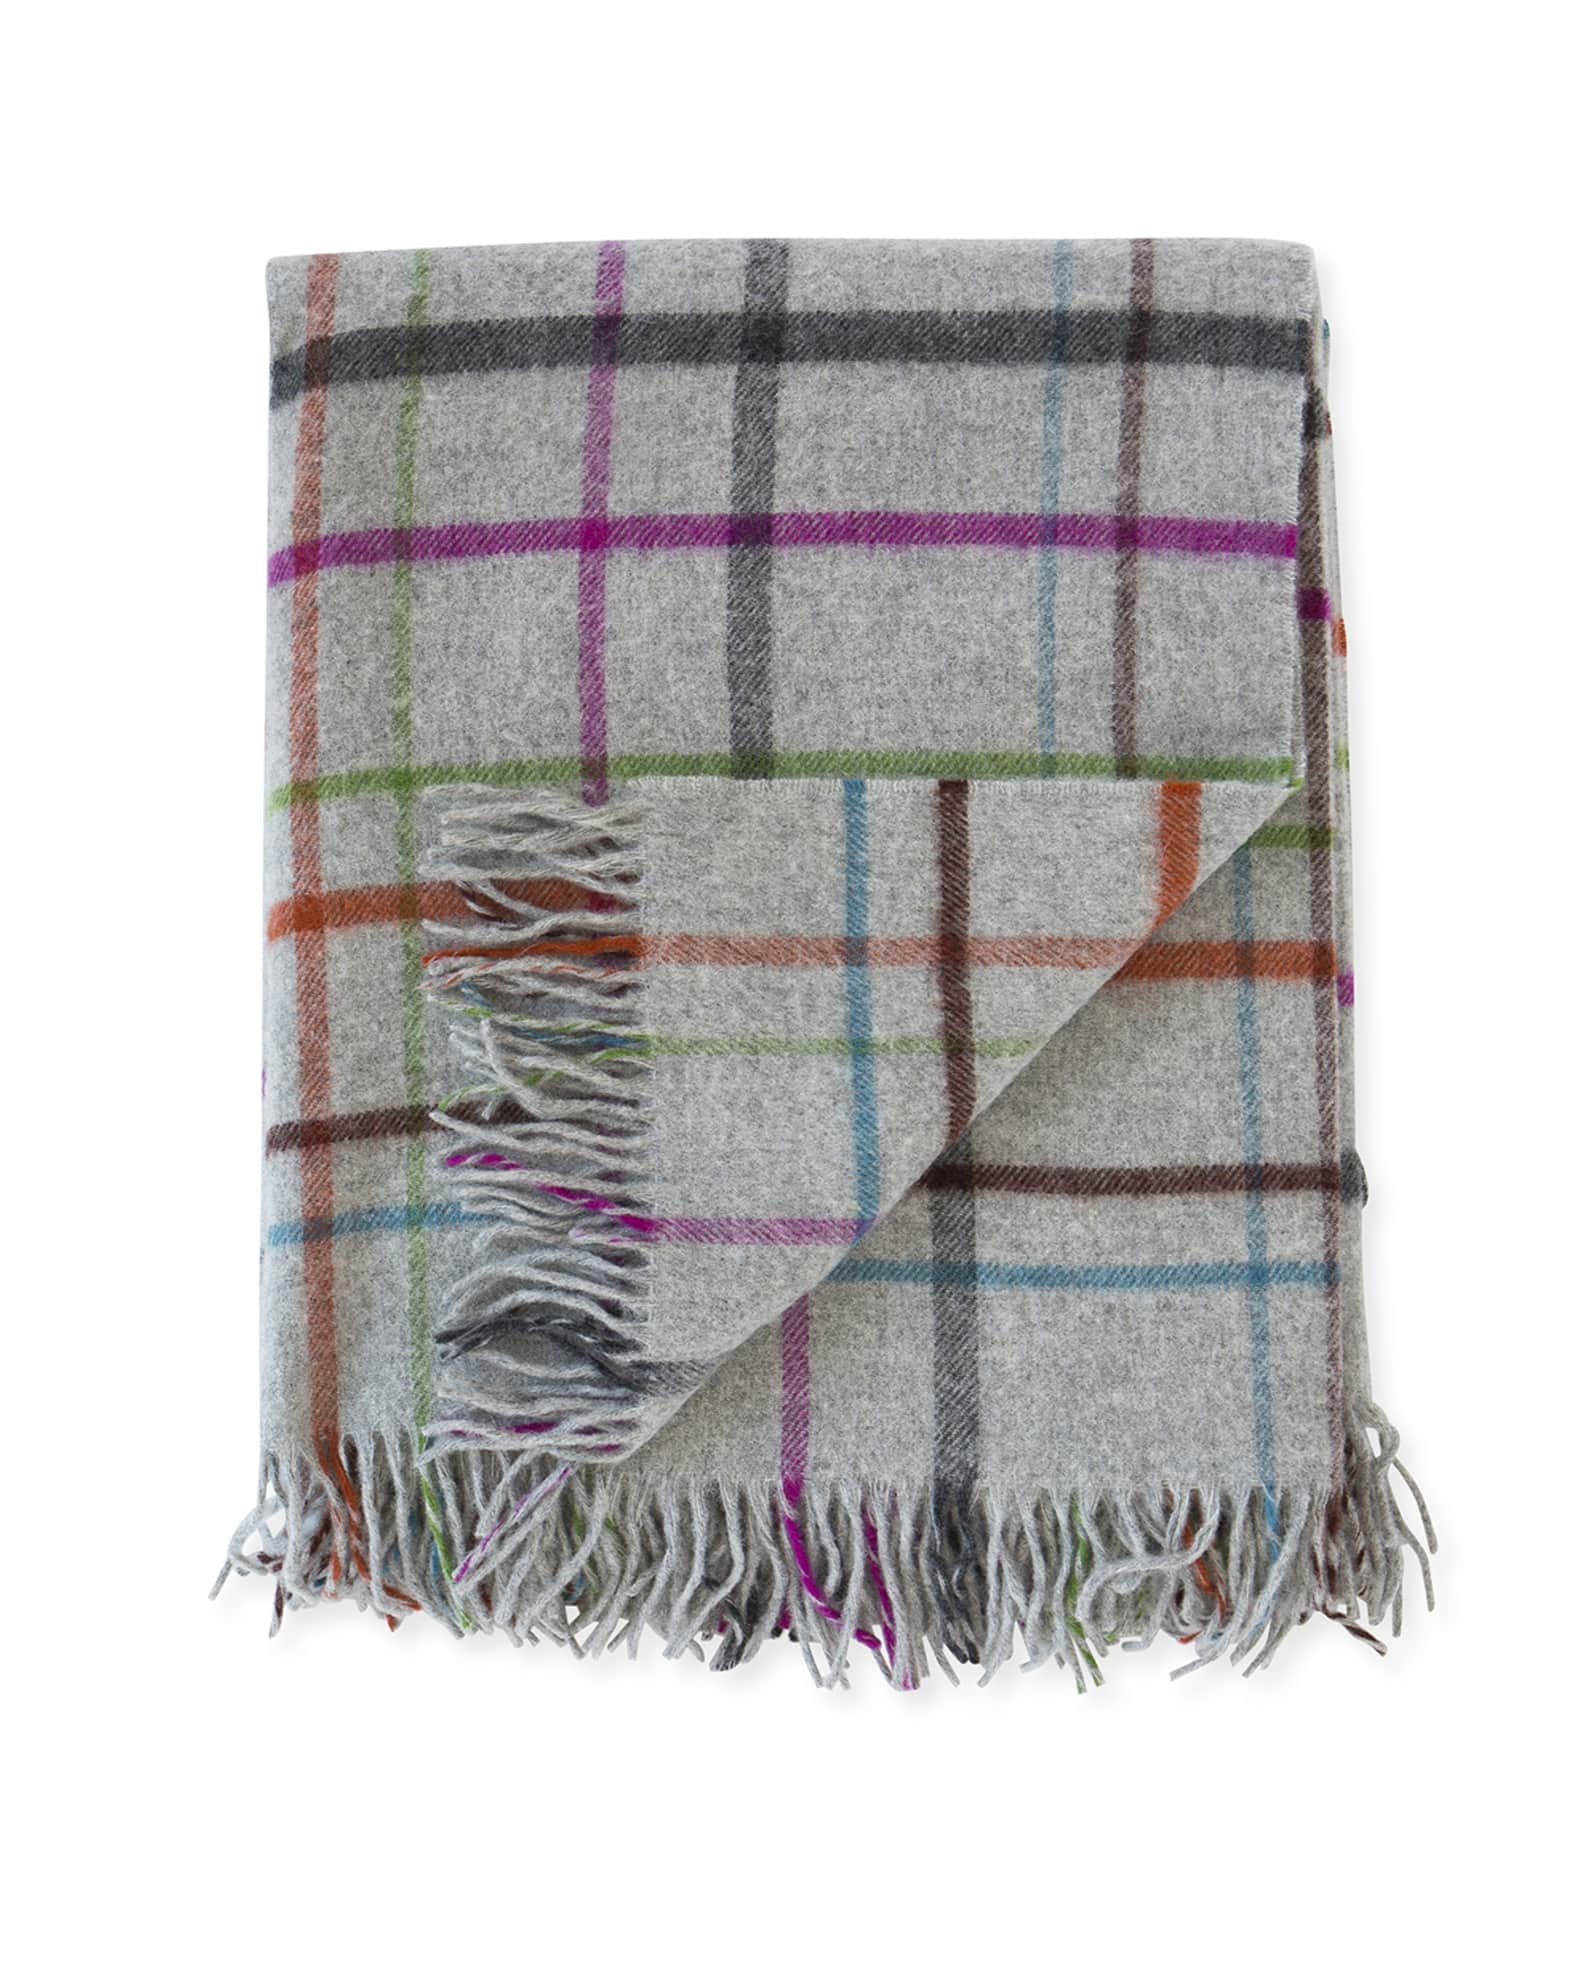 Evangeline Linens Merino Lambswool Patterned Throw, Fog Plaid | Horchow